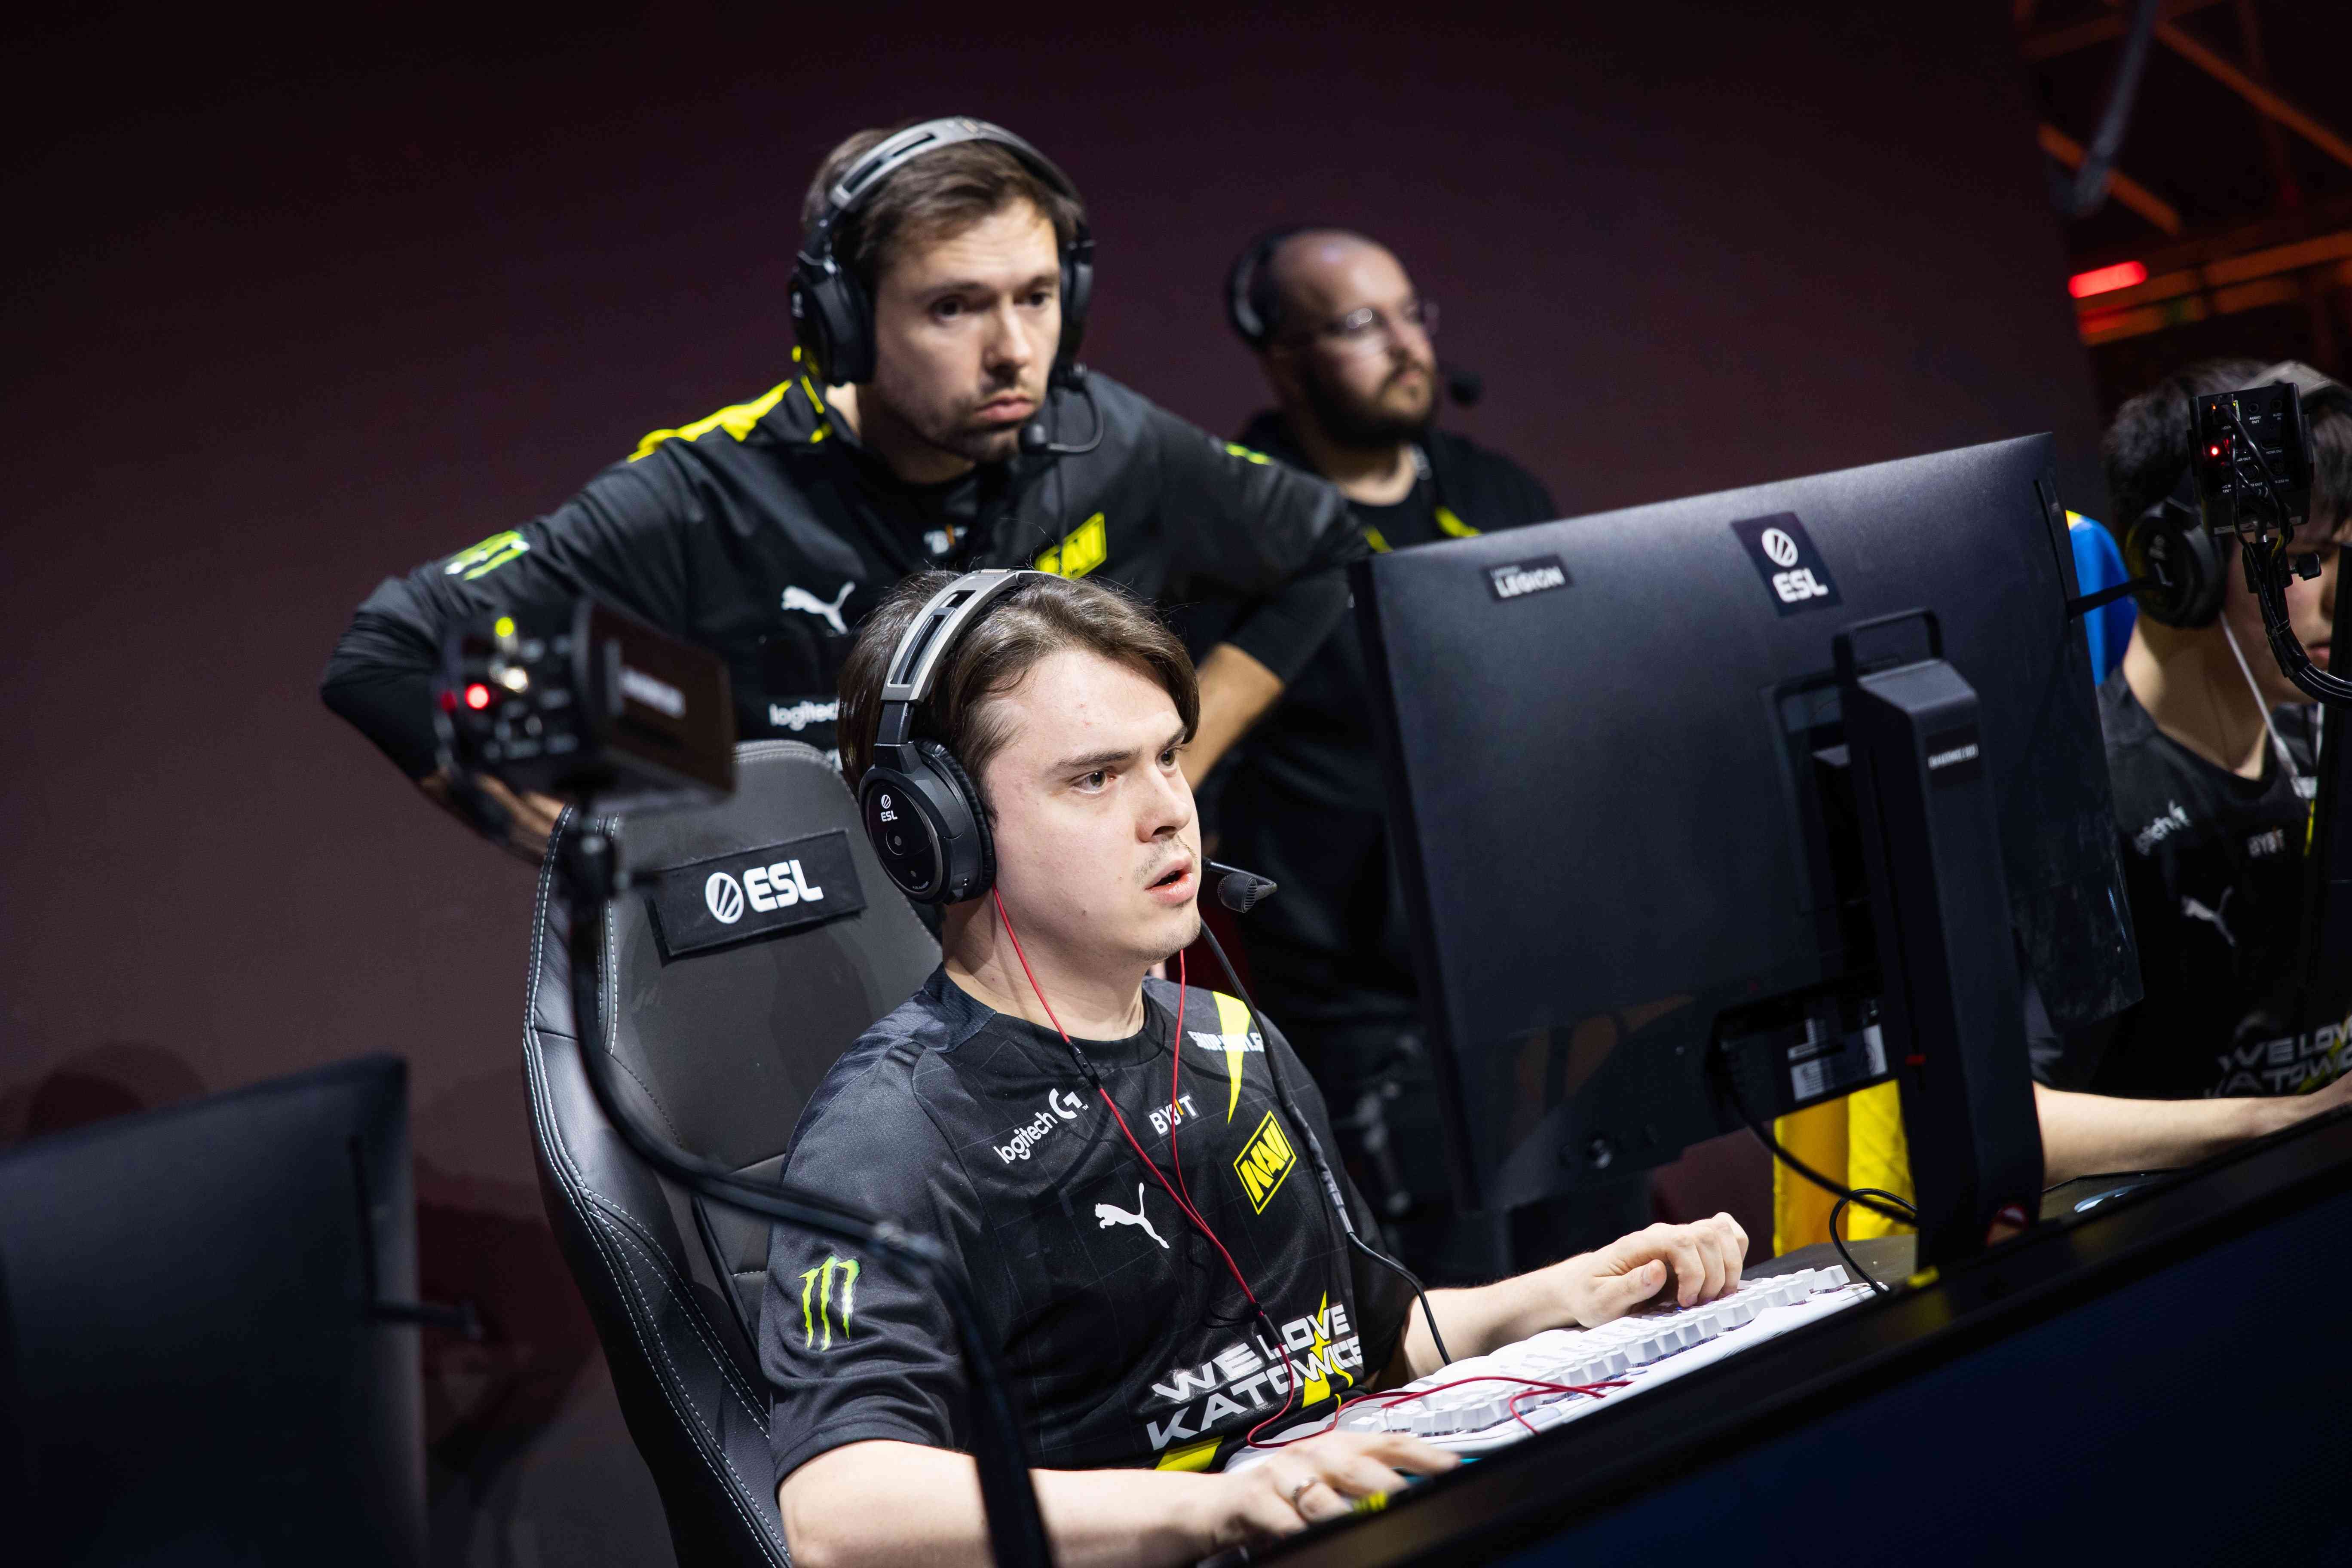 B1ad3’s continued contributions to NAVI’s winning culture cannot be understated, and will be necessary for their new roster to perform (Image Credits: ESL | Adela Sznajder)